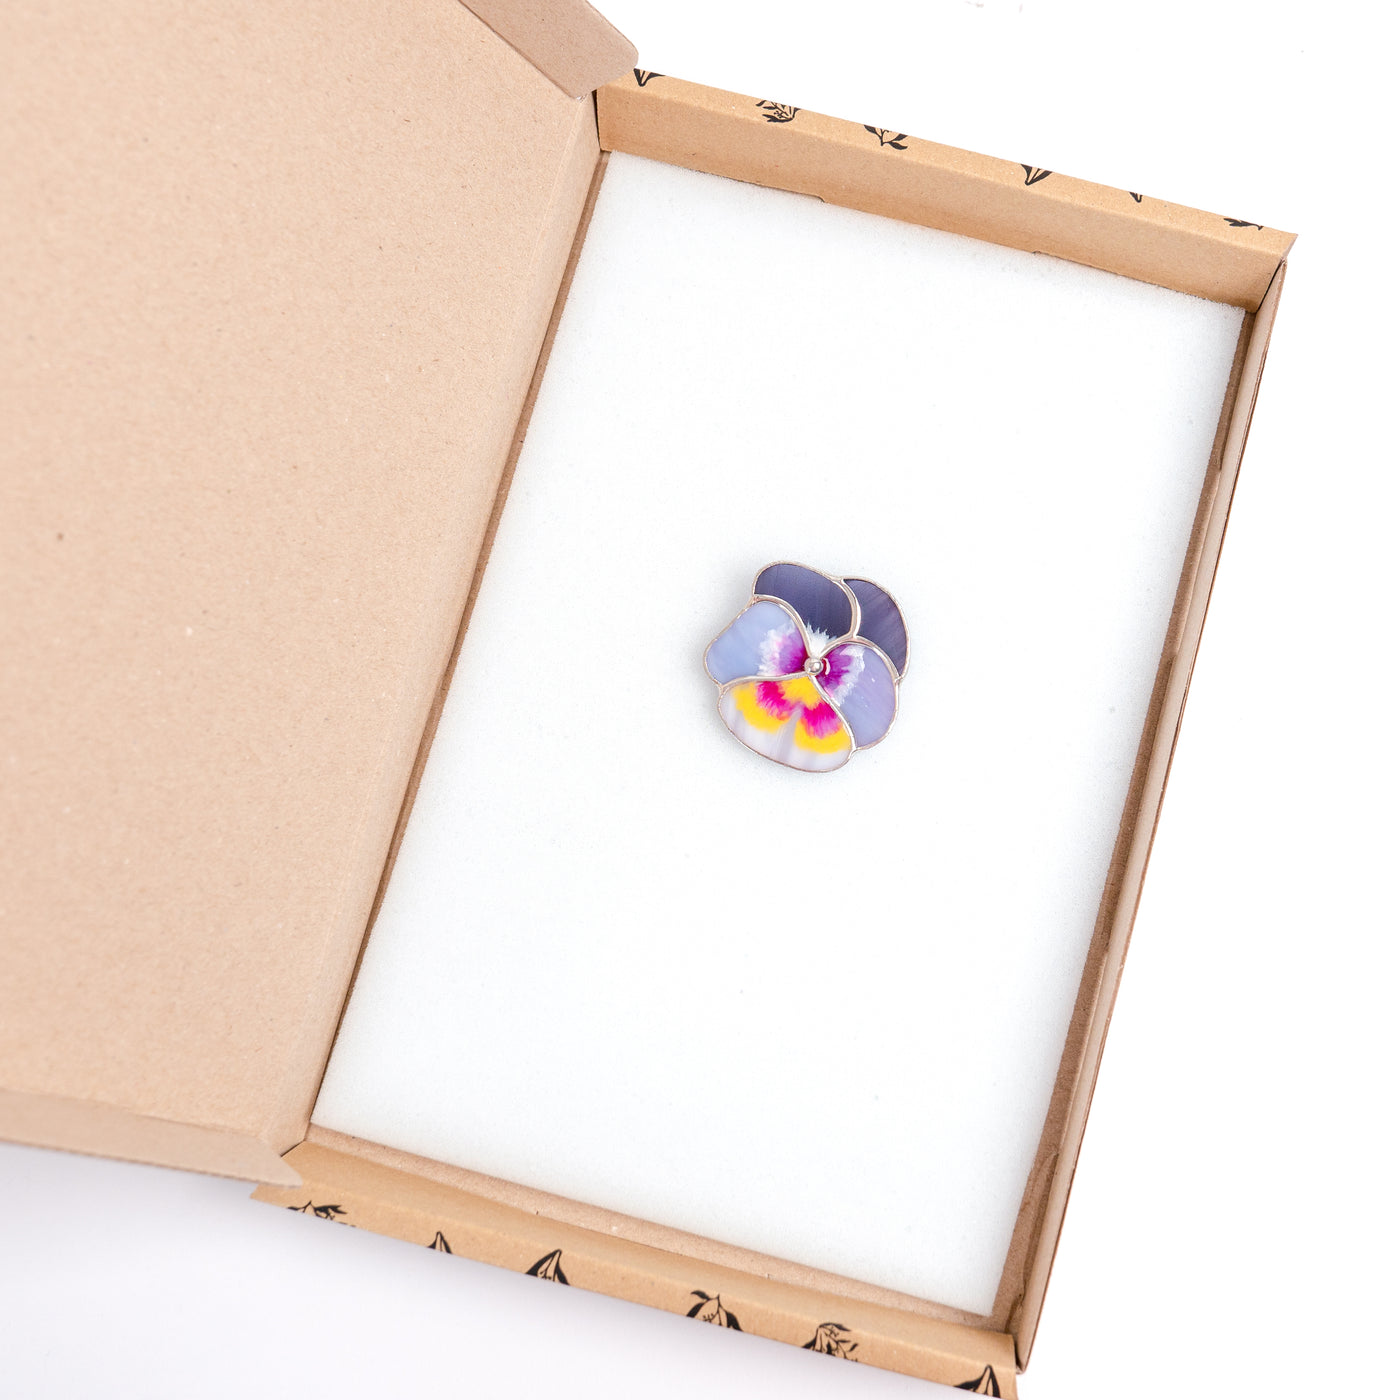 Stained glass purple pansy brooch in a brand box